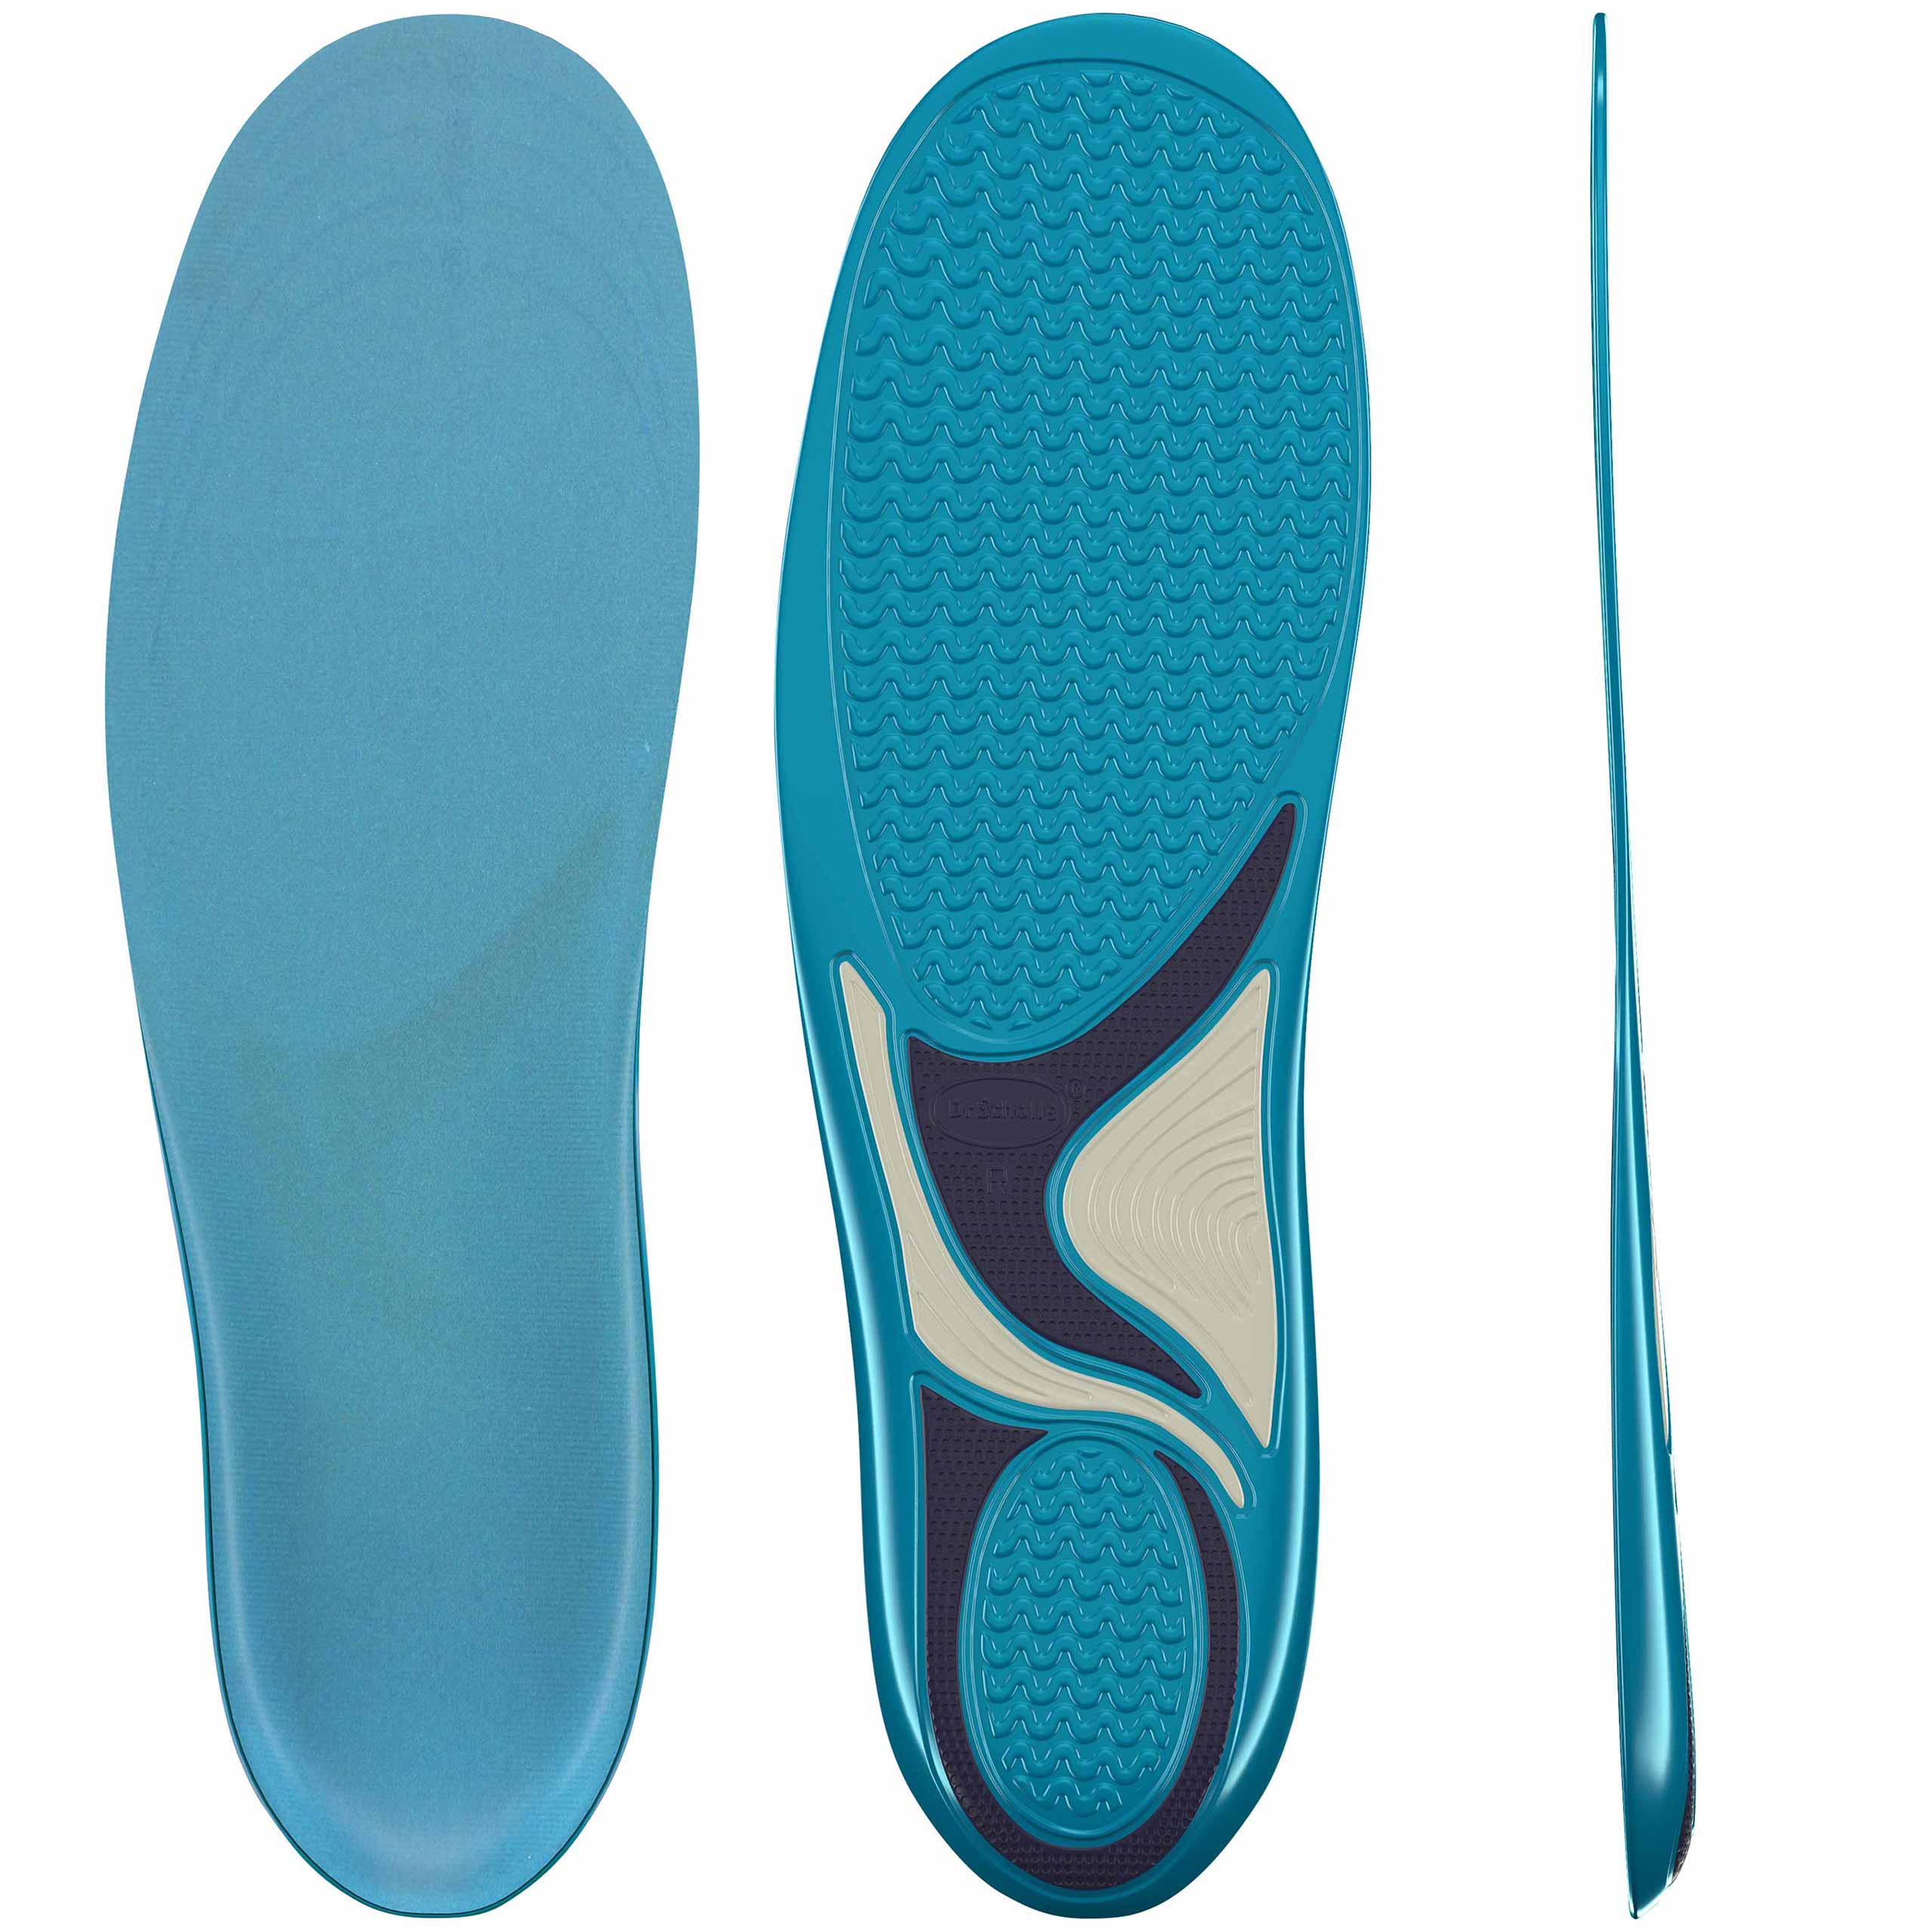 One Pair Gel Magnetic Insoles size 2-7.5 